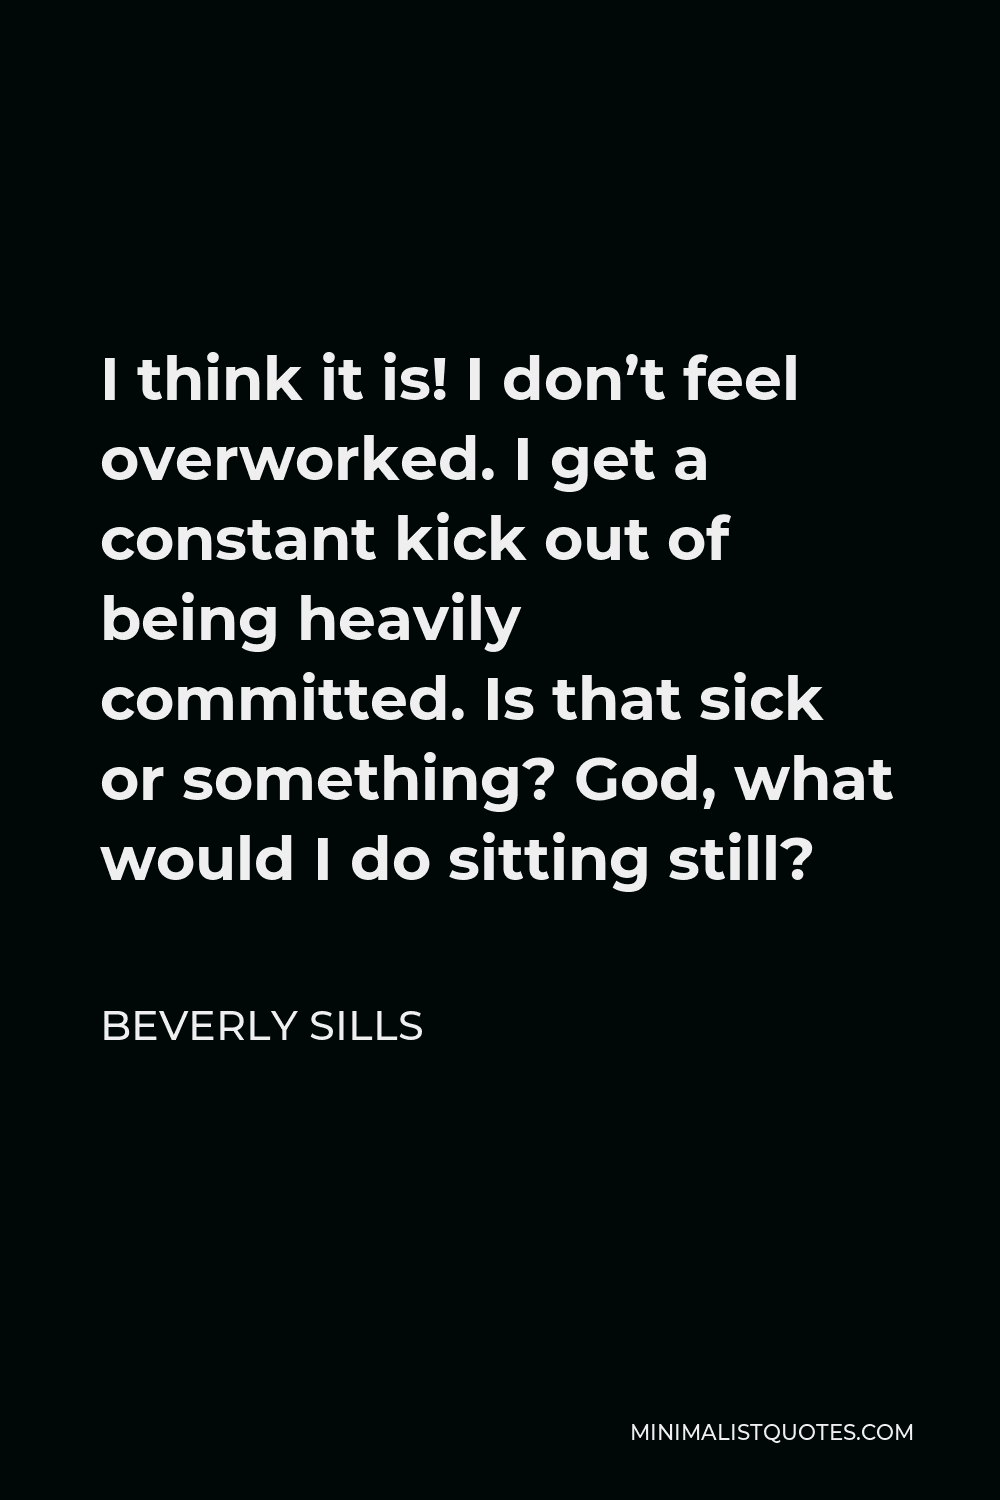 Beverly Sills Quote - I think it is! I don’t feel overworked. I get a constant kick out of being heavily committed. Is that sick or something? God, what would I do sitting still?